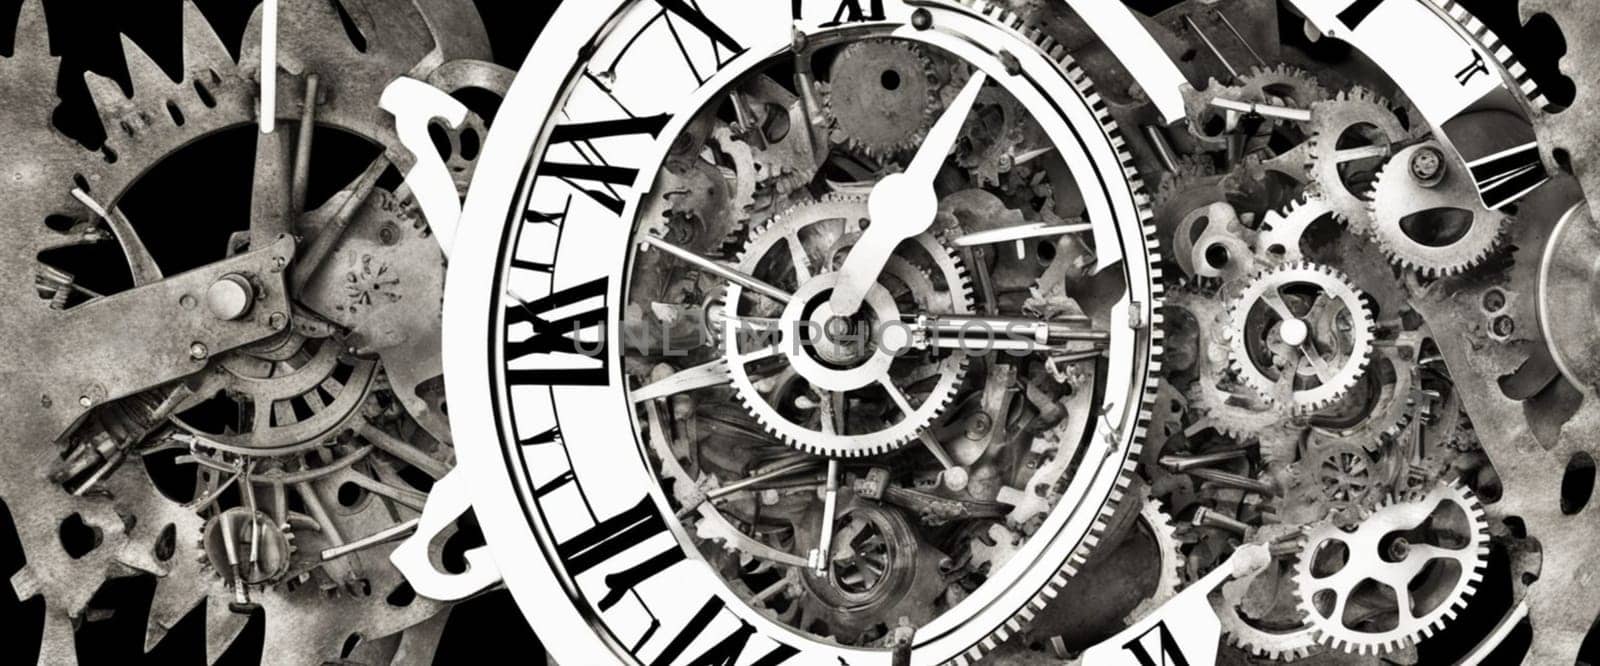 cogwheels in old clock illustration , time passing concept by verbano